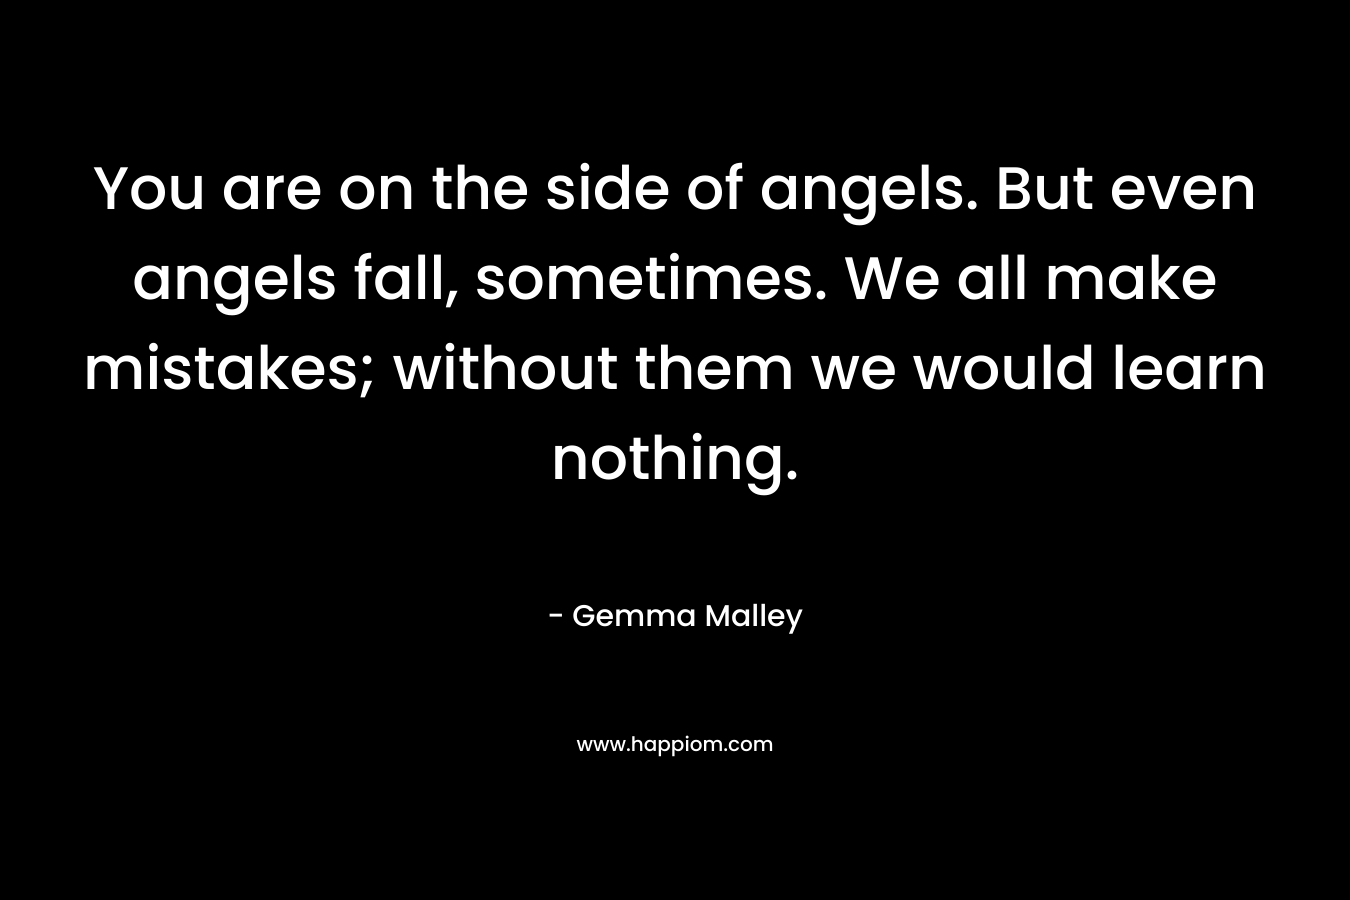 You are on the side of angels. But even angels fall, sometimes. We all make mistakes; without them we would learn nothing.